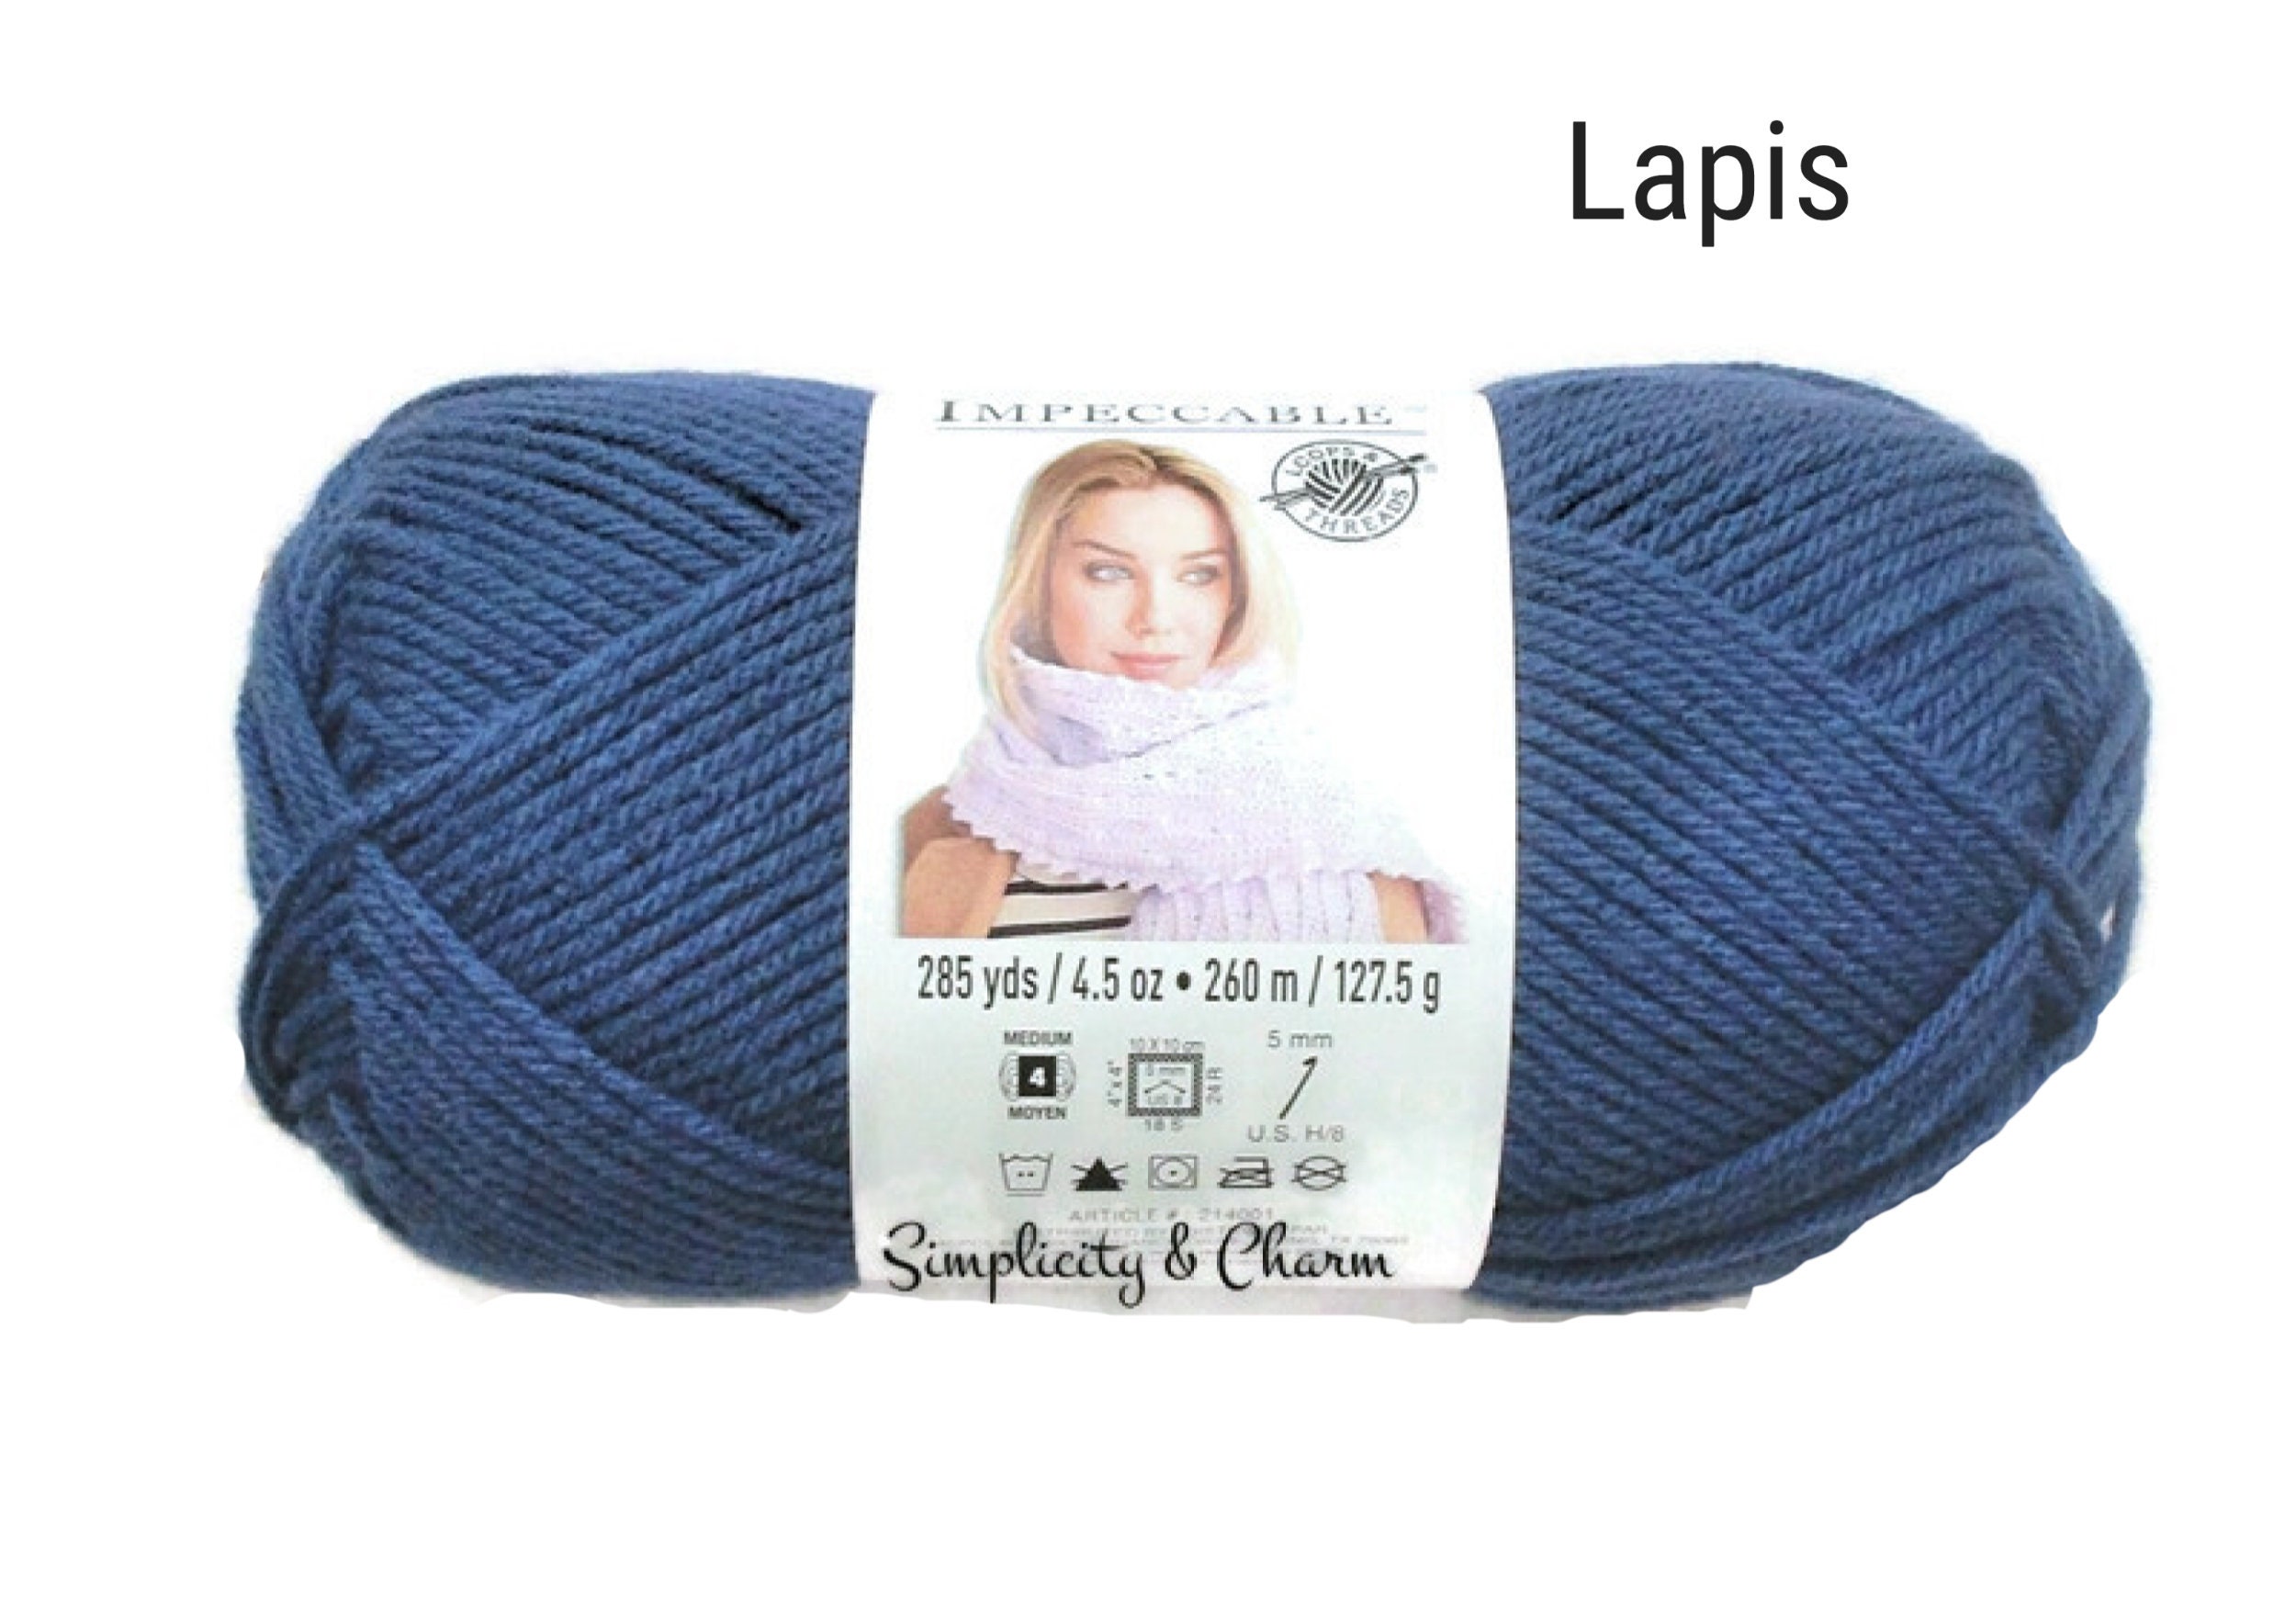 Loops & Threads Impeccable Yarns - Assorted Multi Colors